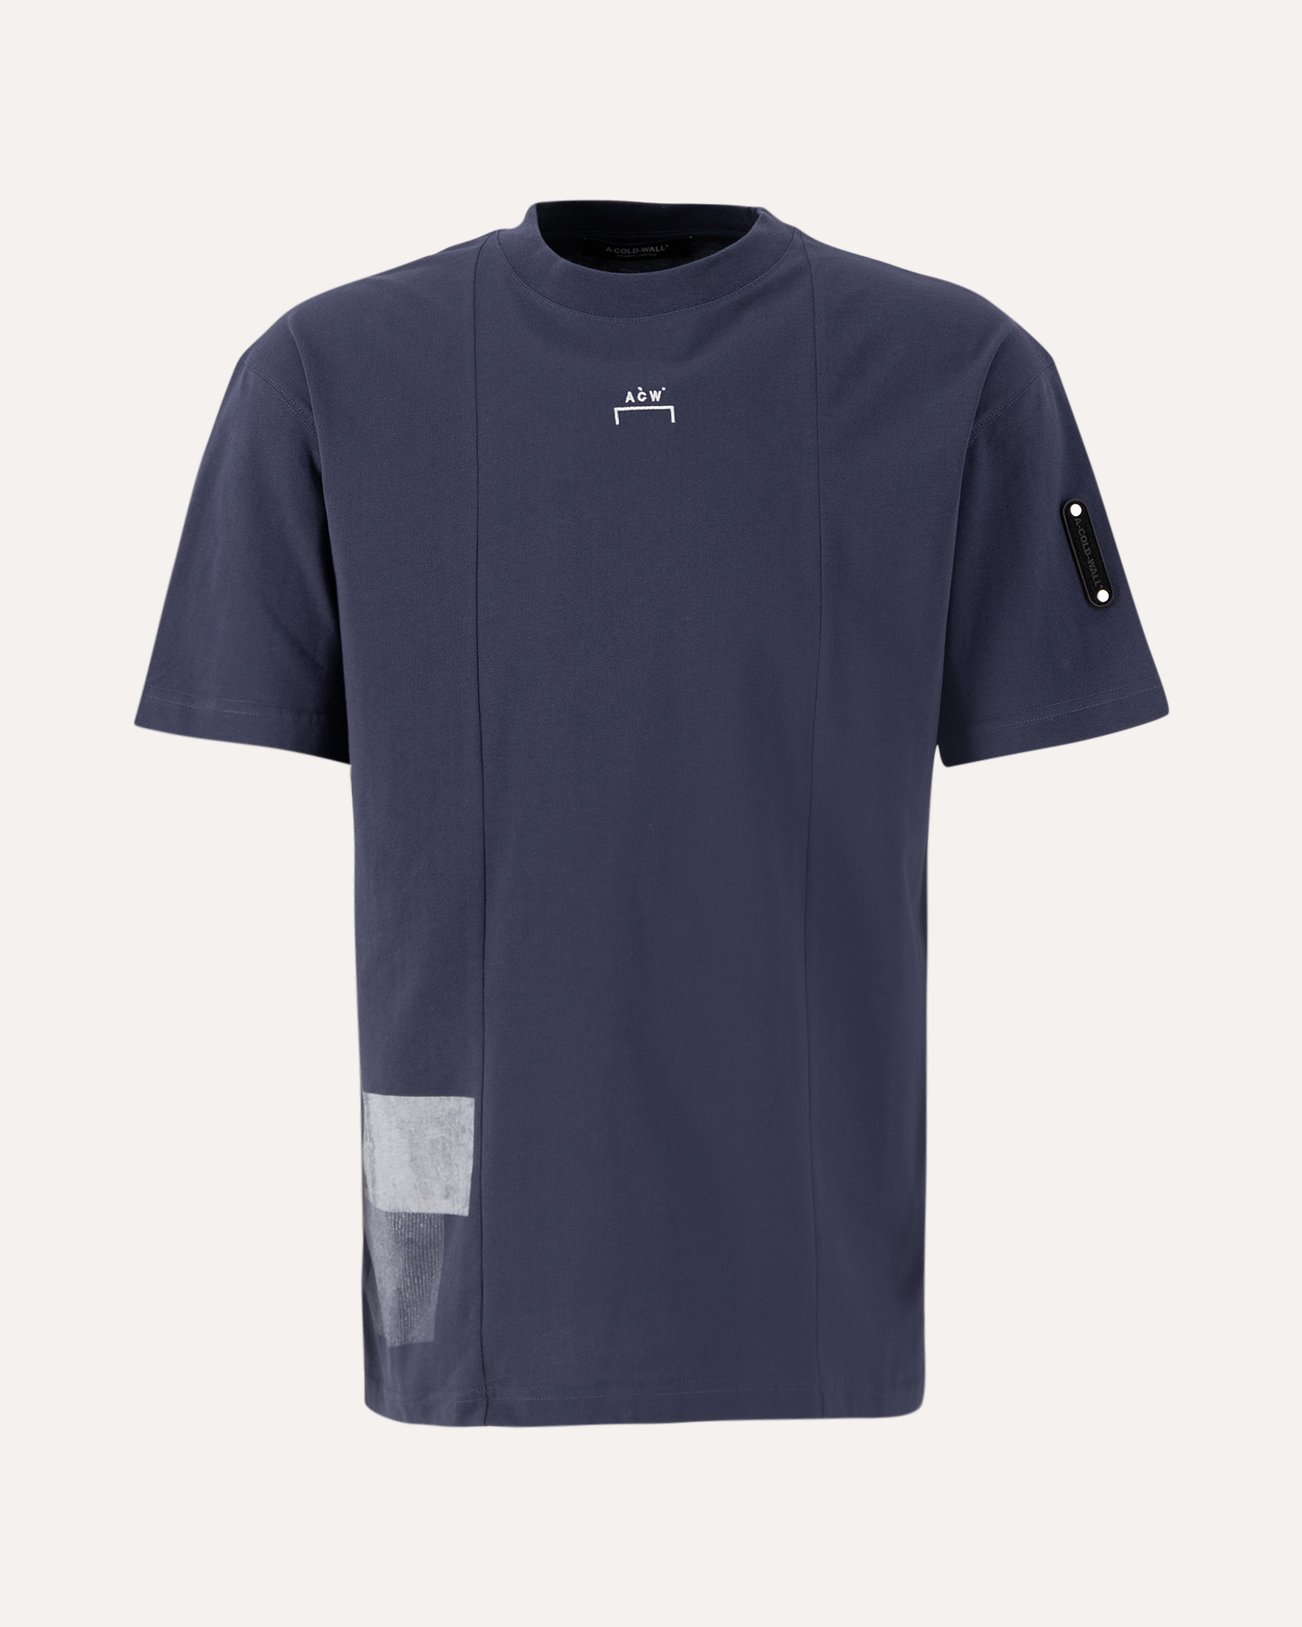 A-COLD-WALL* Brutalist T-Shirt NAVY 1